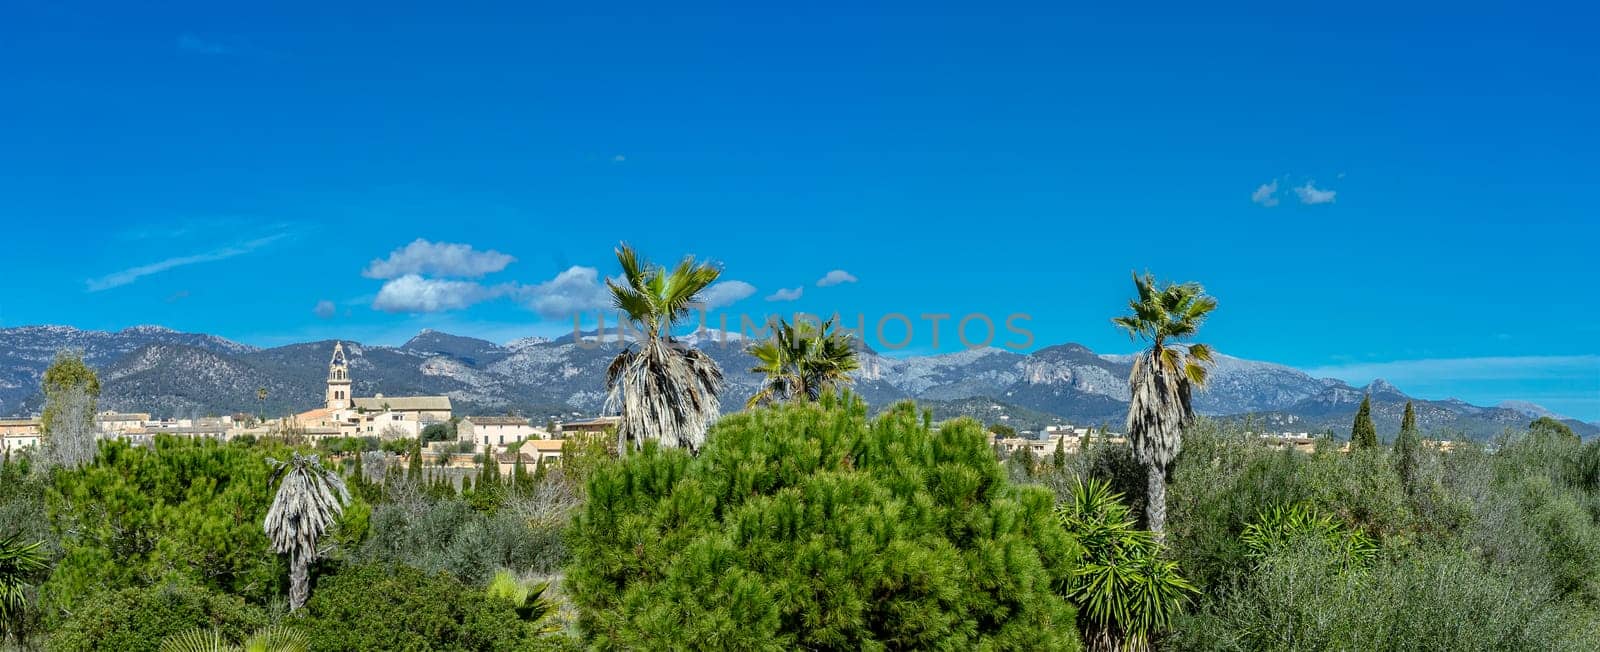 Panoramic Landscape of Consell Village with Snow-Capped Tramuntana Mountains by Juanjo39